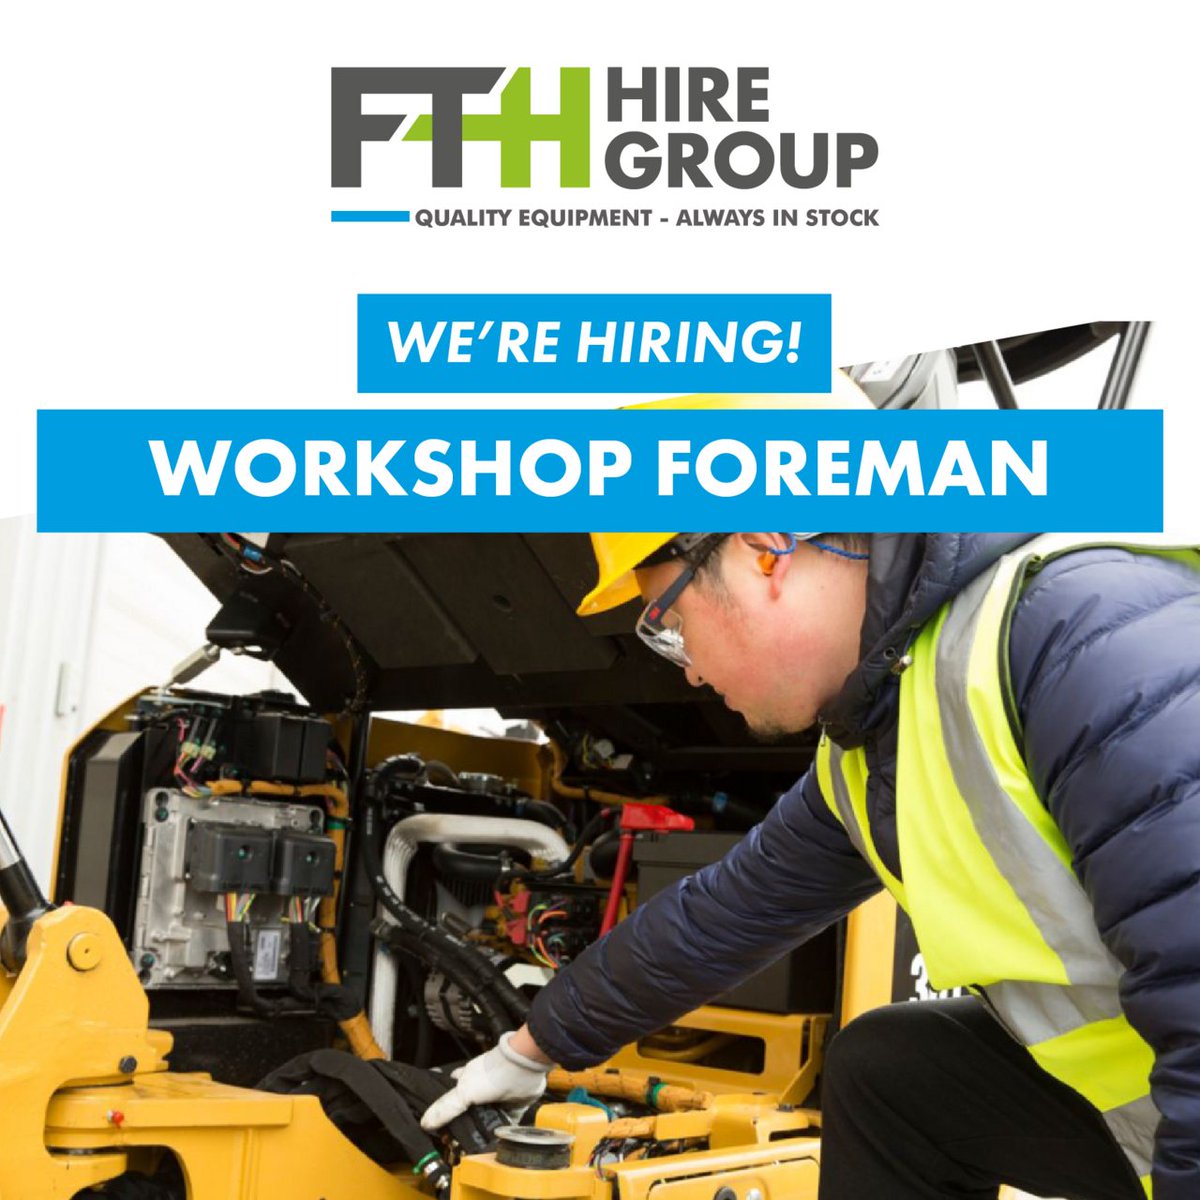 We are recruiting for a Workshop Foreman at our Guildford Hire Hub, to join our growing business. 🚜🚜

Please apply to:
✉️ hr@fthhiregroup.co.uk

#guildfordjobs #guildfordrecruitment #workshopforeman #workshopjobs #workshoprecruitment